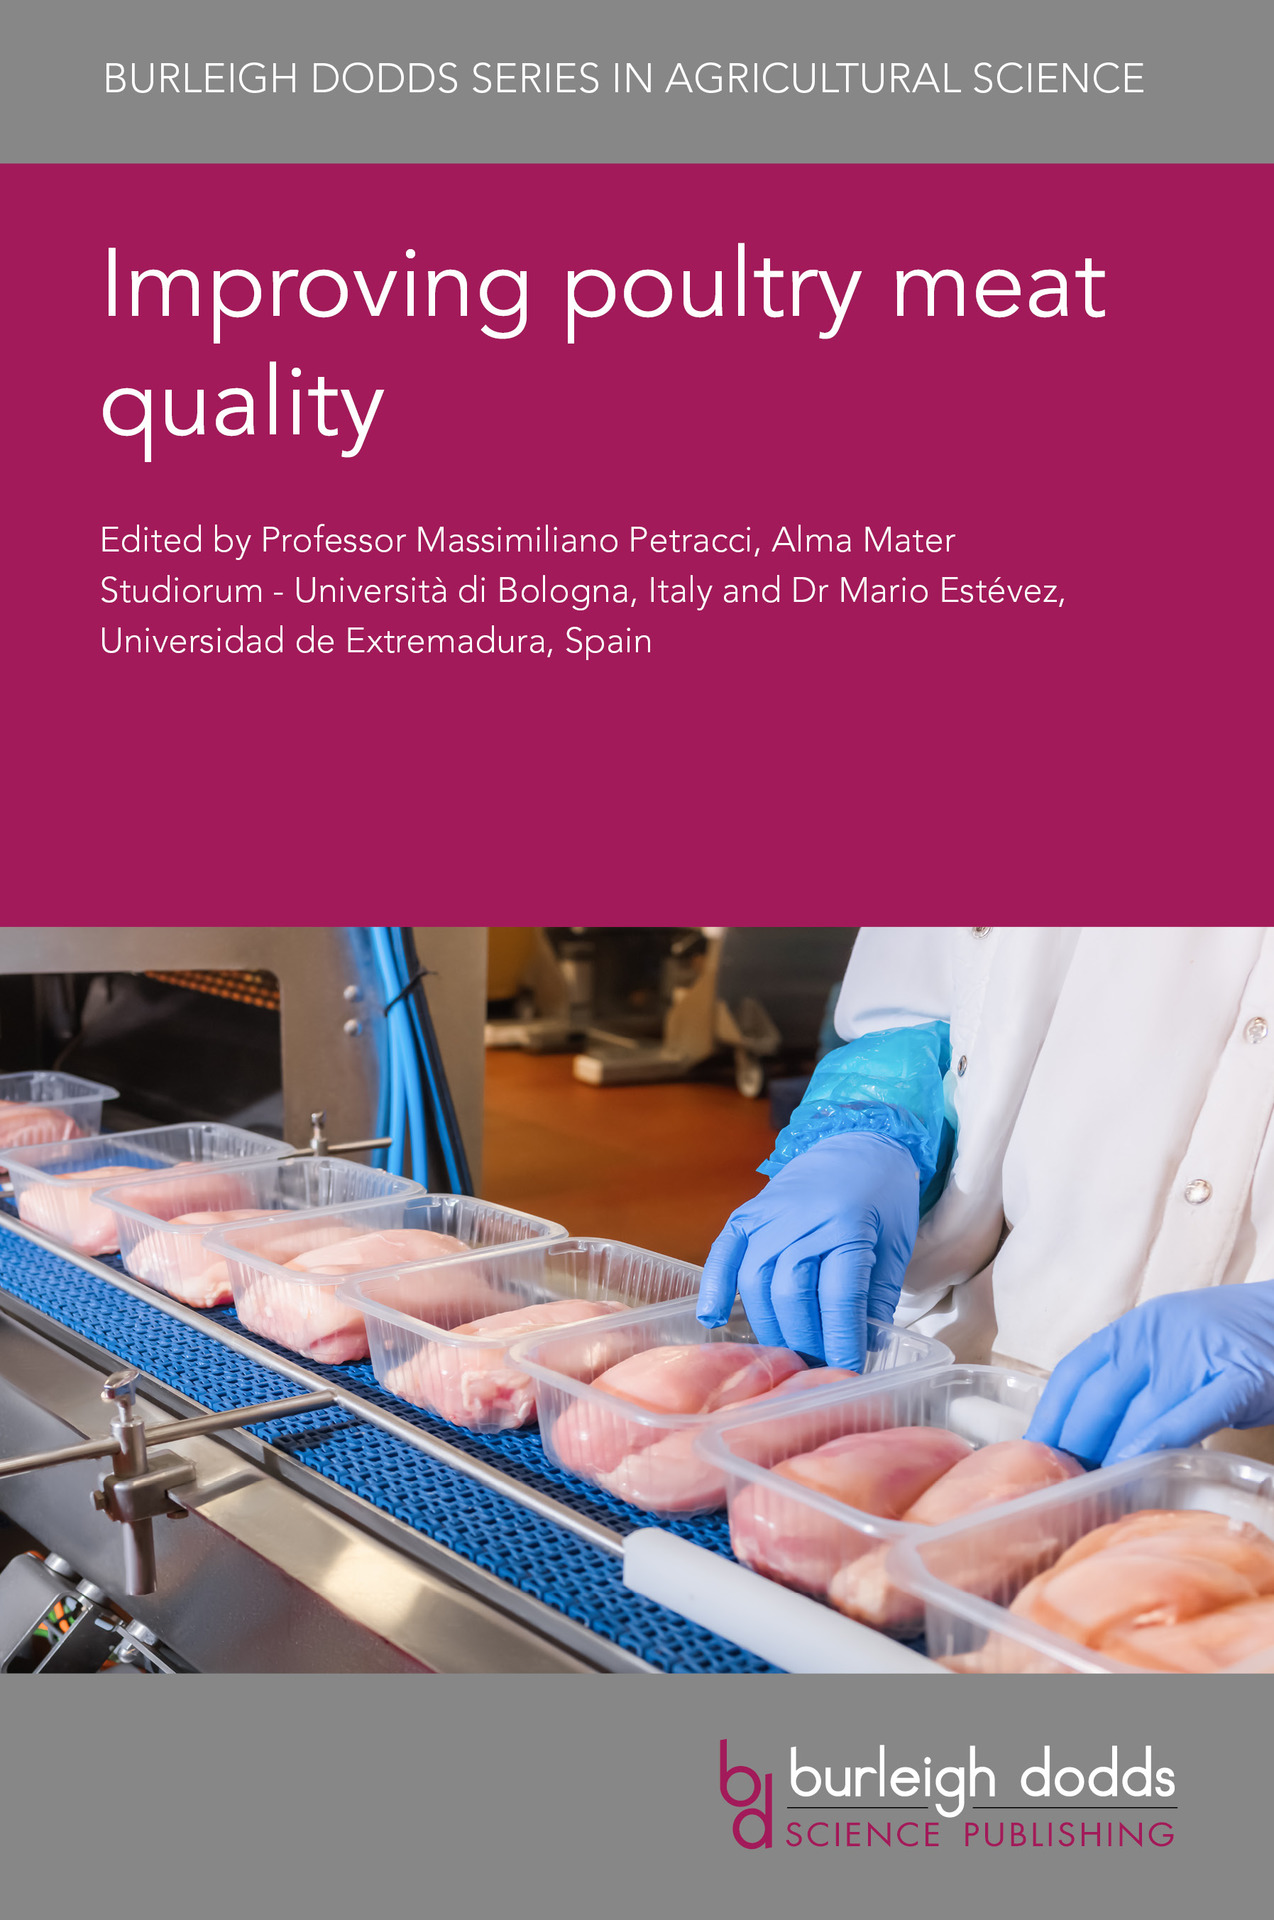 Improving poultry meat quality